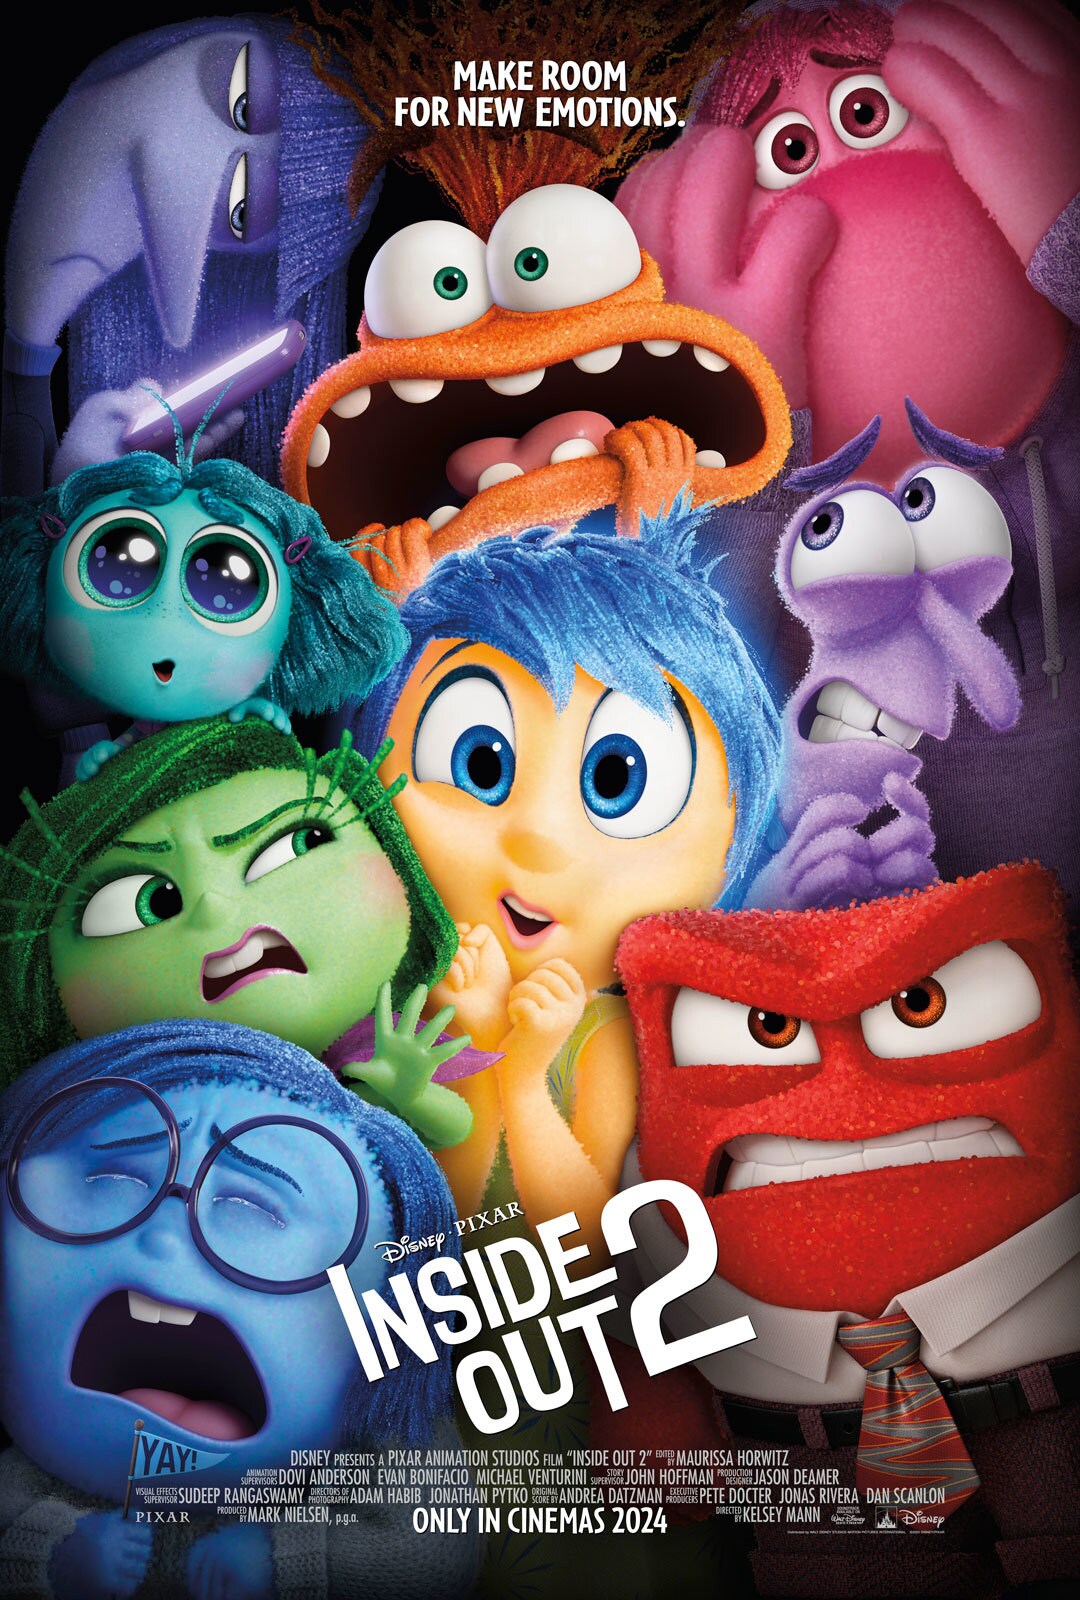 Big changes. New emotions. | Disney•Pixar | Inside Out 2 | Only in cinemas June 2024 | movie poster